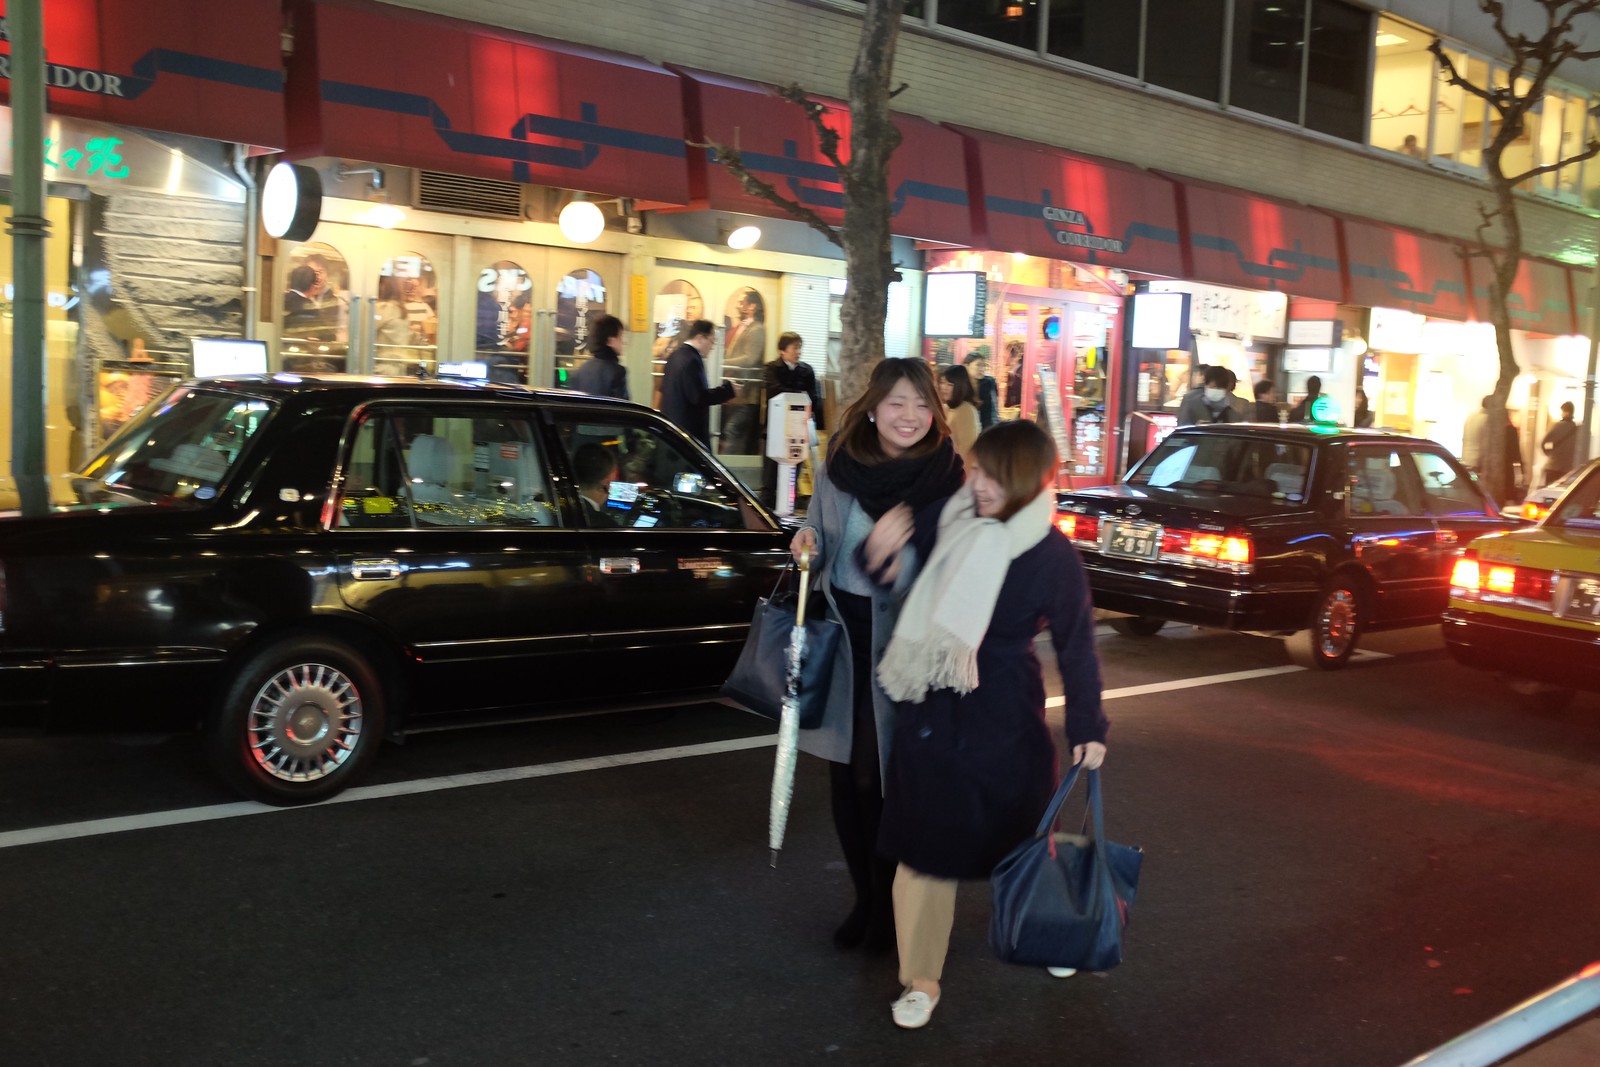 The night at Ginza in Tokyo, Japan.